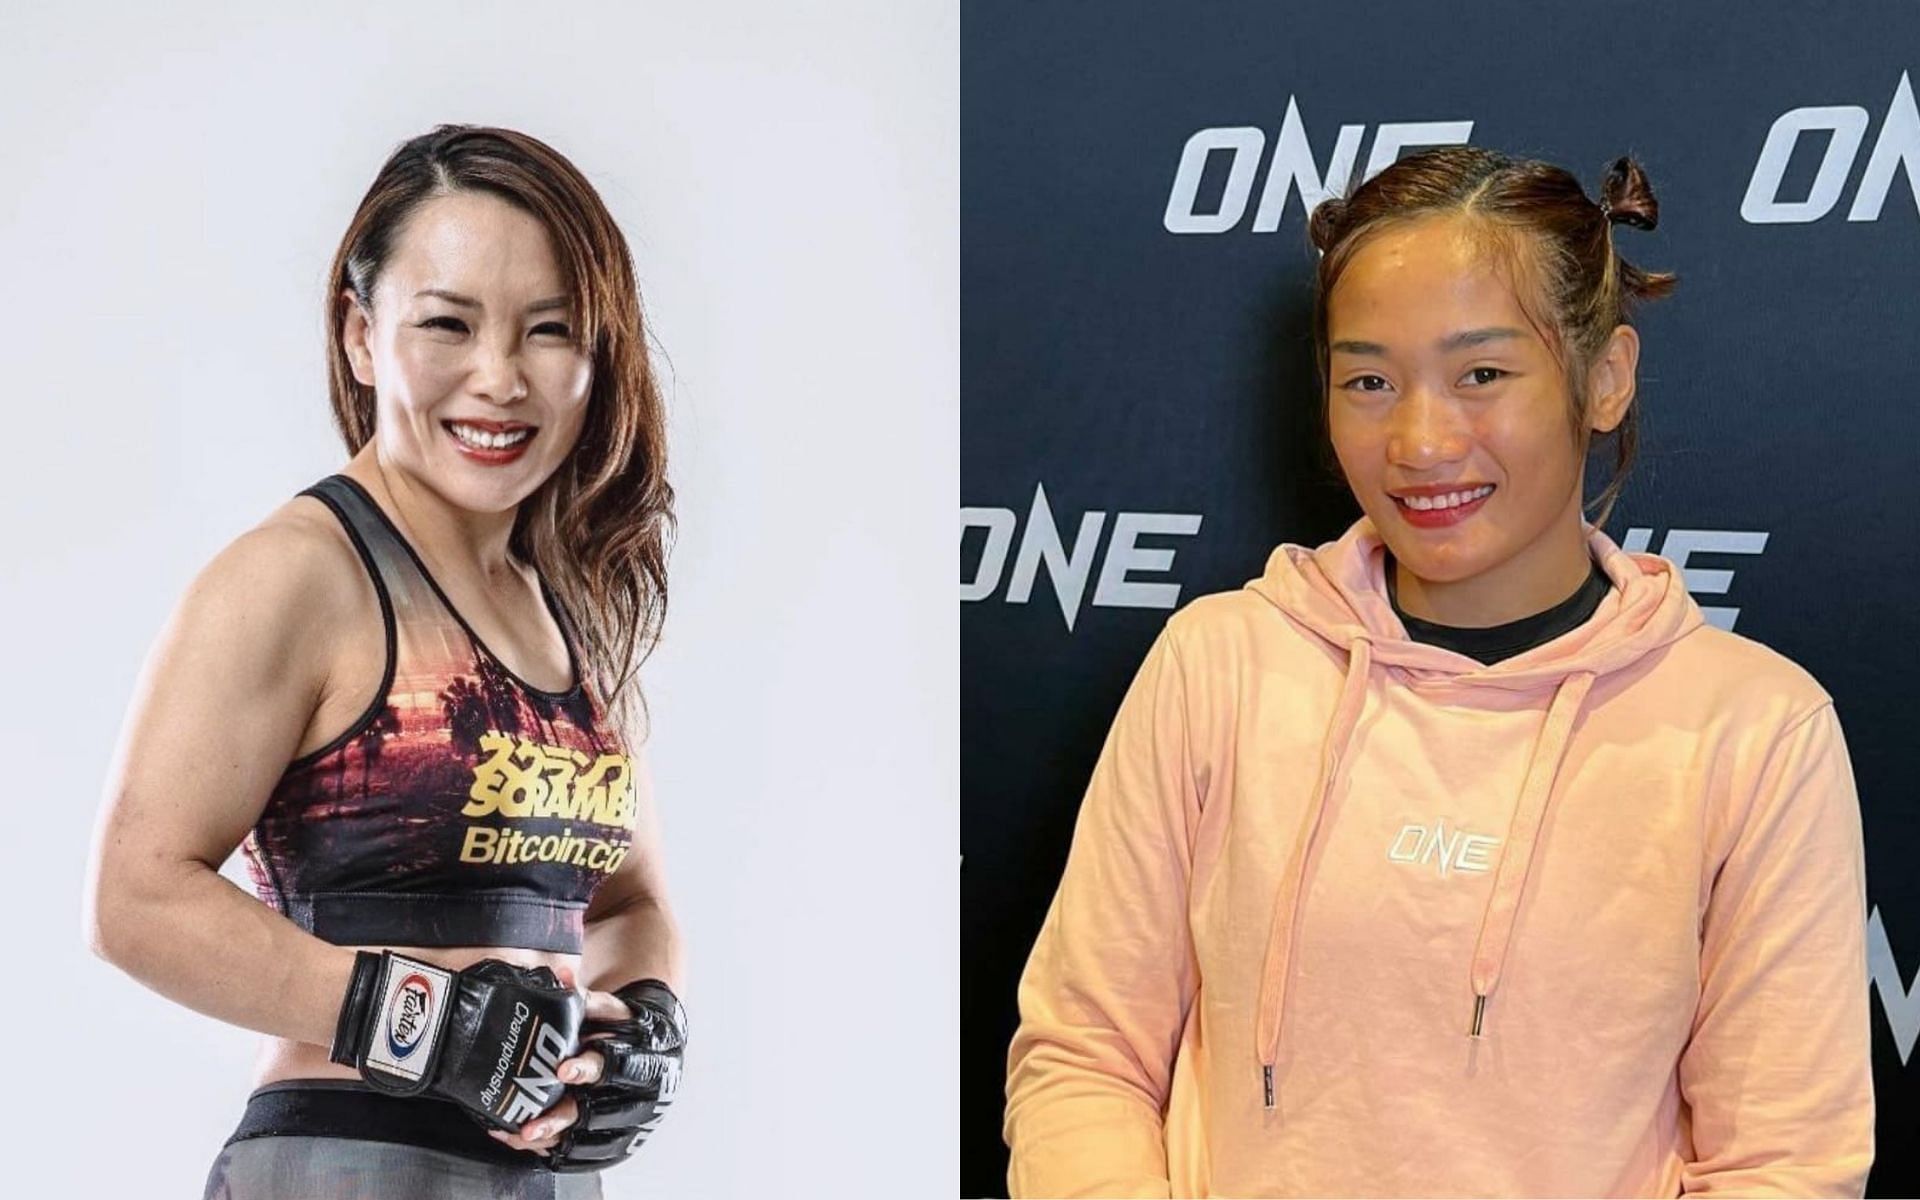 ONE Championship veteran Mei Yamaguchi replaces injured Jenelyn Olsim at ONE: Bad Blood. [Photos: Mei Yamaguchi, Jenelyn Olsim on Instagram]